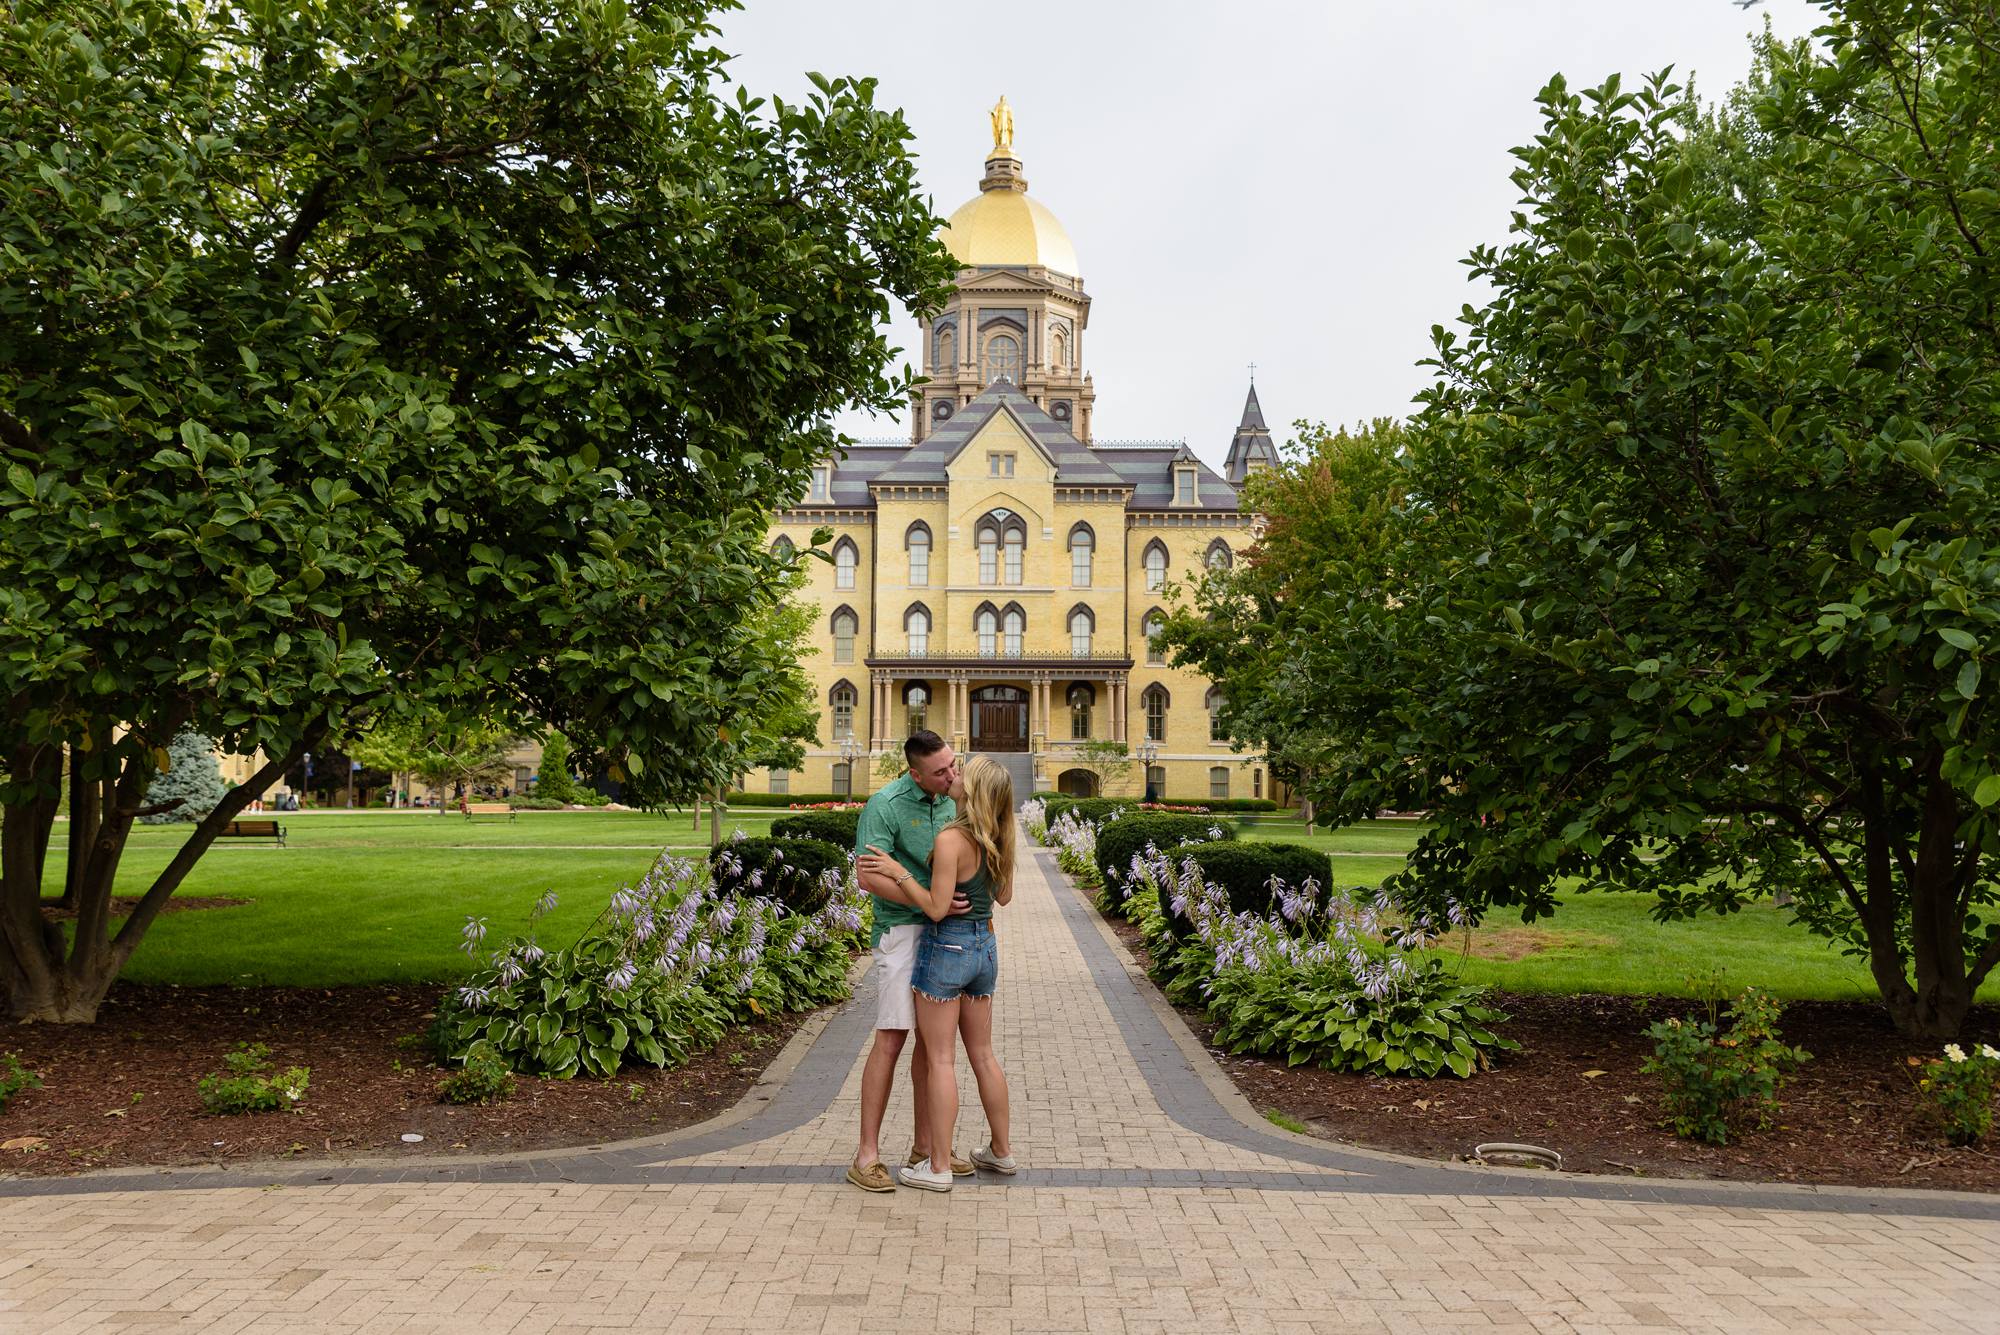 Girlfriend being proposed to in front of the Golden Dome on the campus of University of Notre Dame